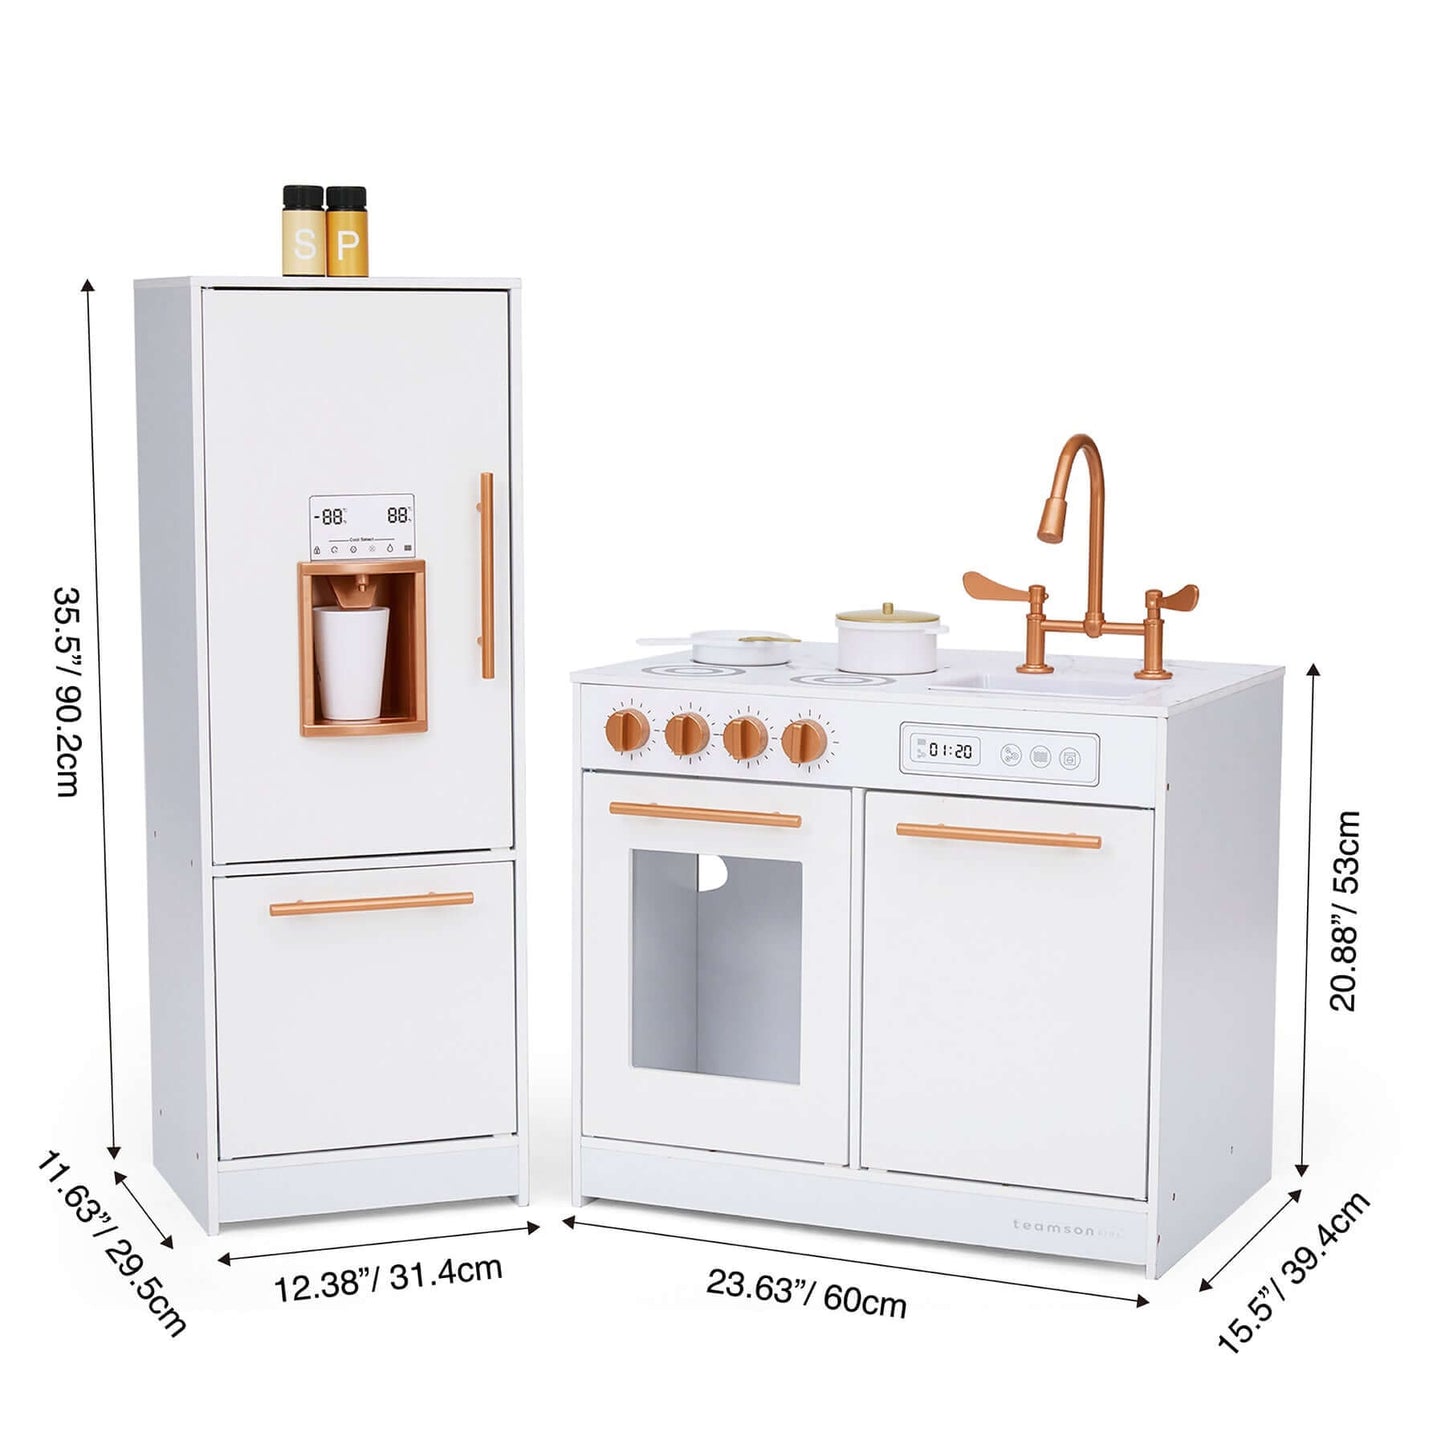 Teamson Kids Little Chef Milano Two-Piece Modular Modern Delight Play Kitchen TD-13811A specifications